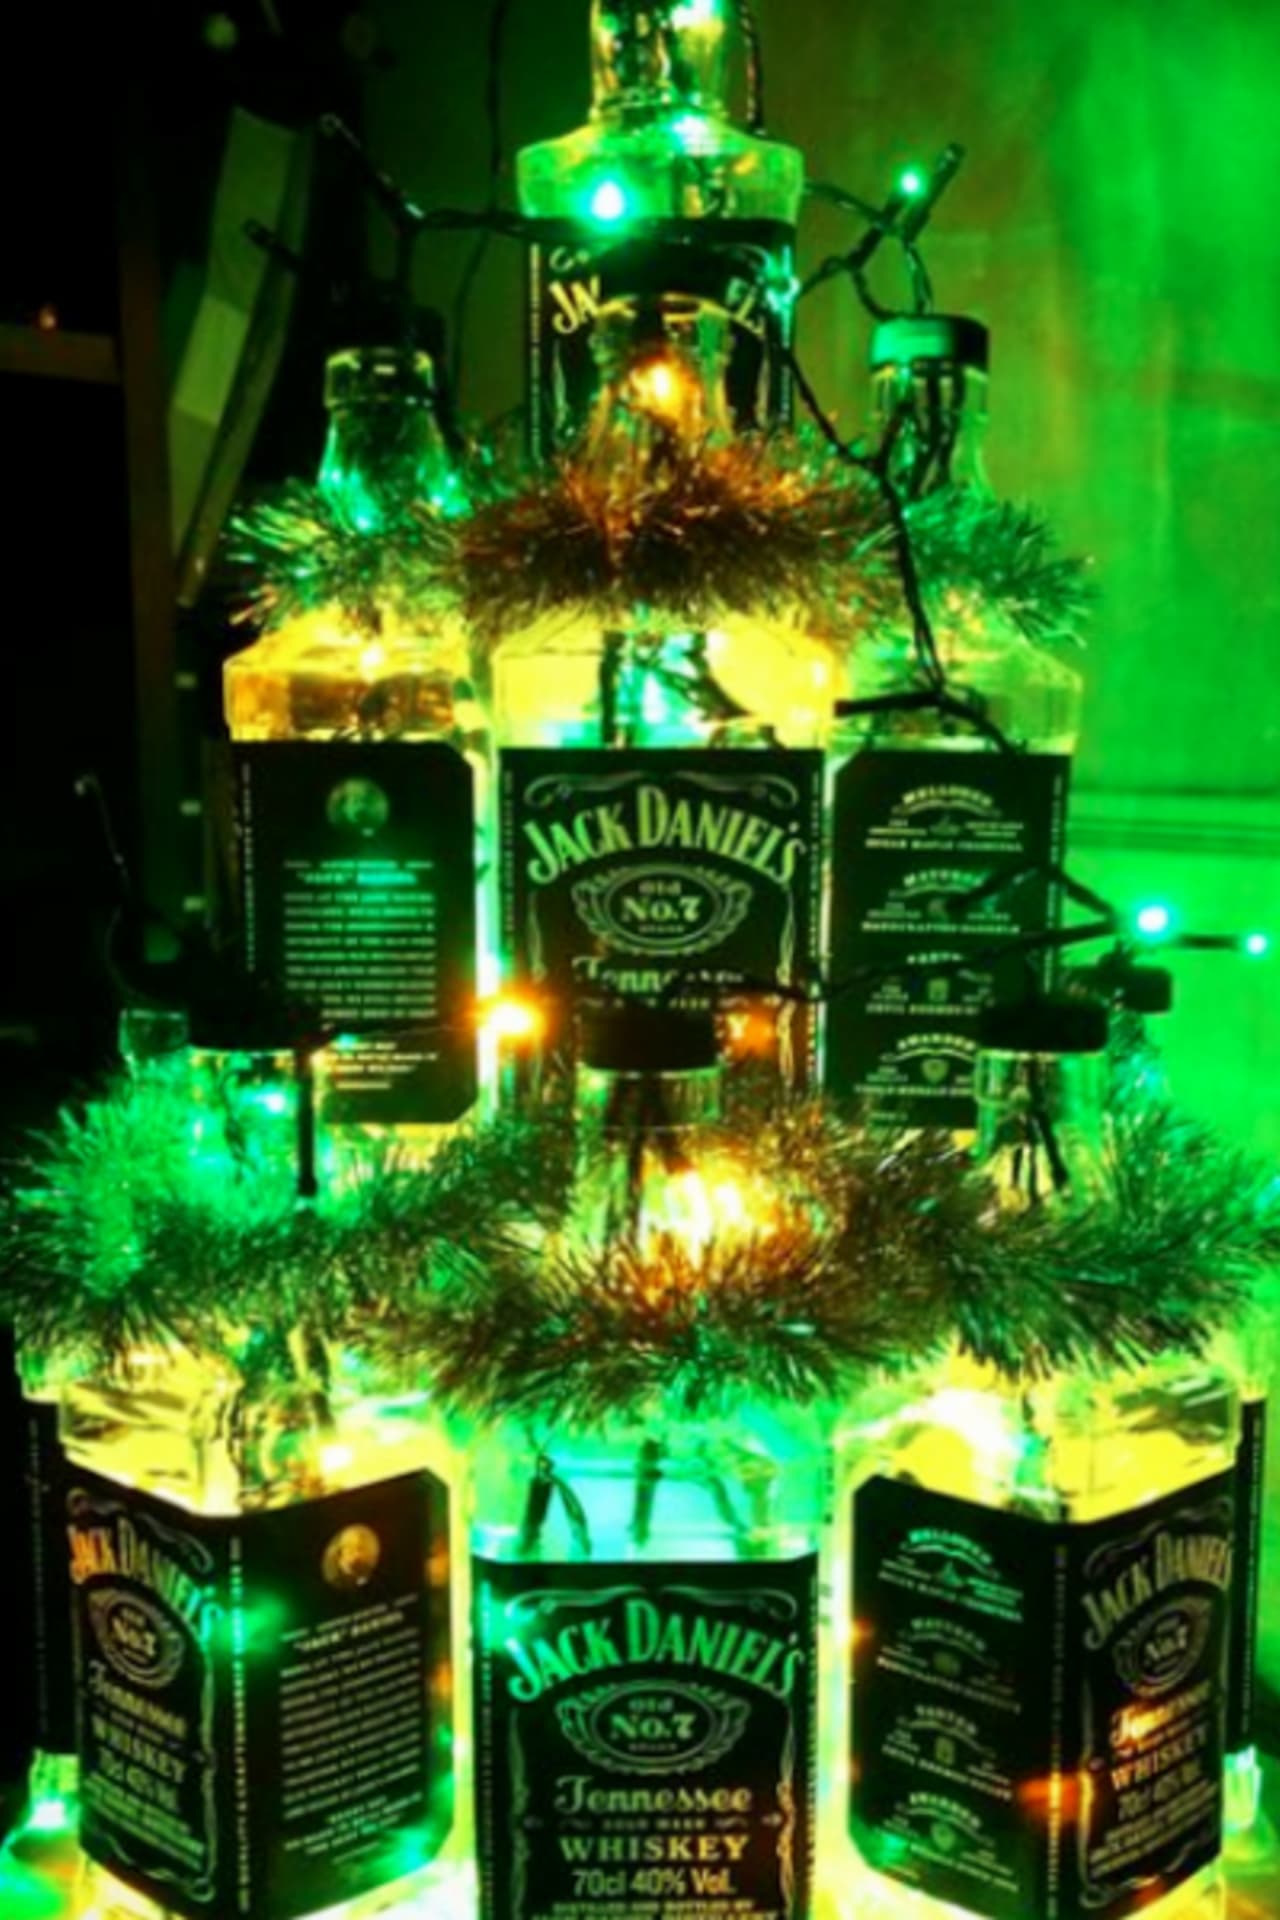 Whiskey Bottle Crafts - Jack Daniels Christmas Tree - make a Christmas tree out of old empty whiskey bottles